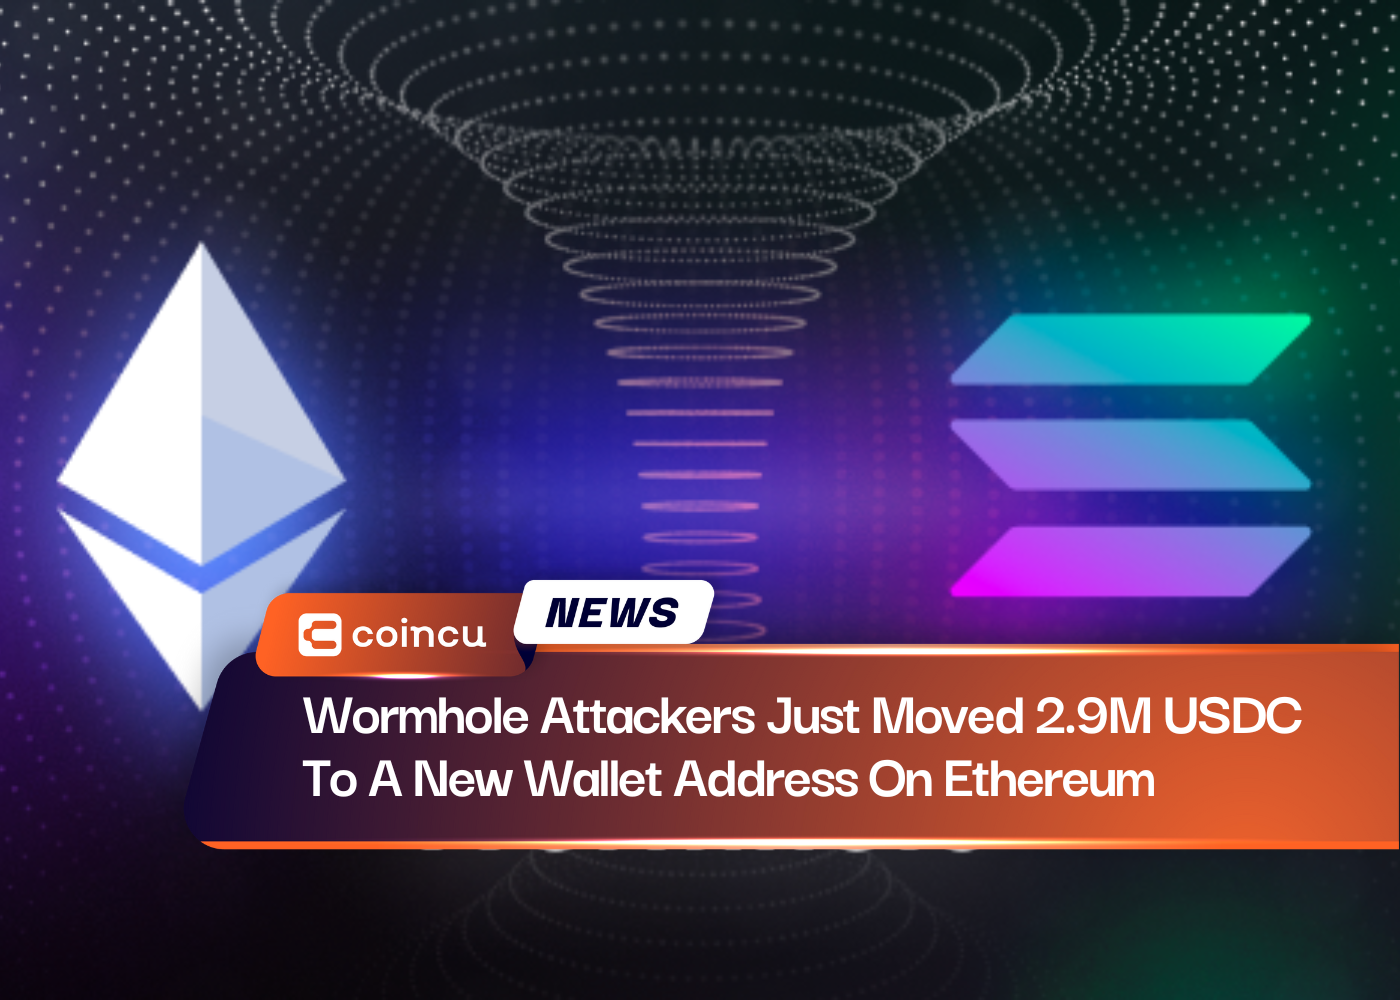 Wormhole Attackers Just Moved 2.9M USDC To A New Wallet Address On Ethereum